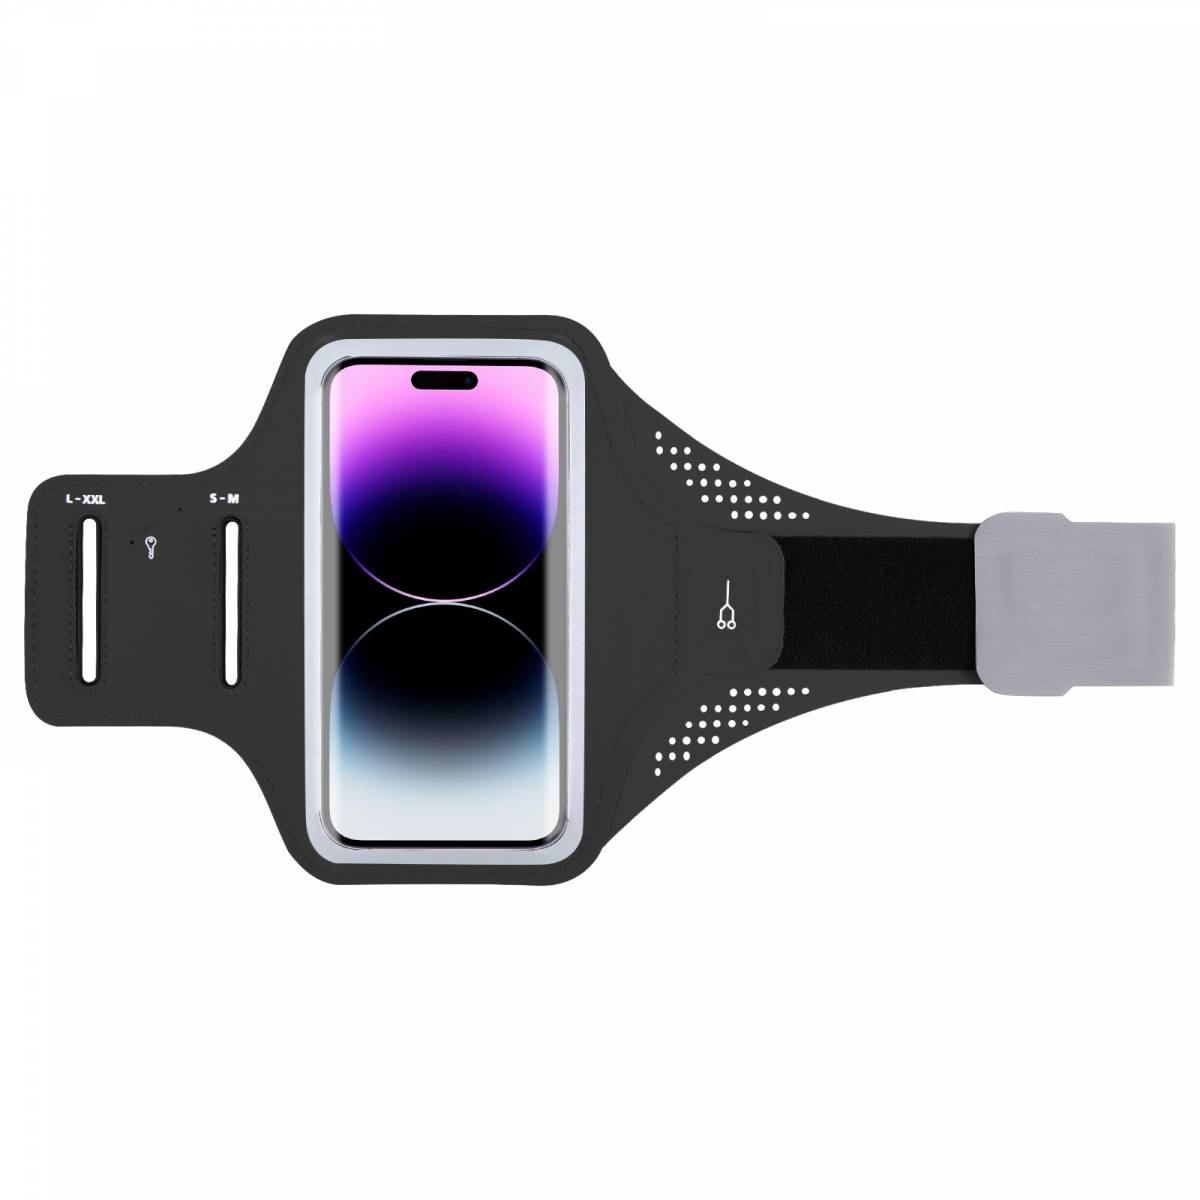 https://cablesformac.com/61660-thickbox_default/xxl-sports-running-bracelet-for-iphonesmartphone-up-to-7.jpg